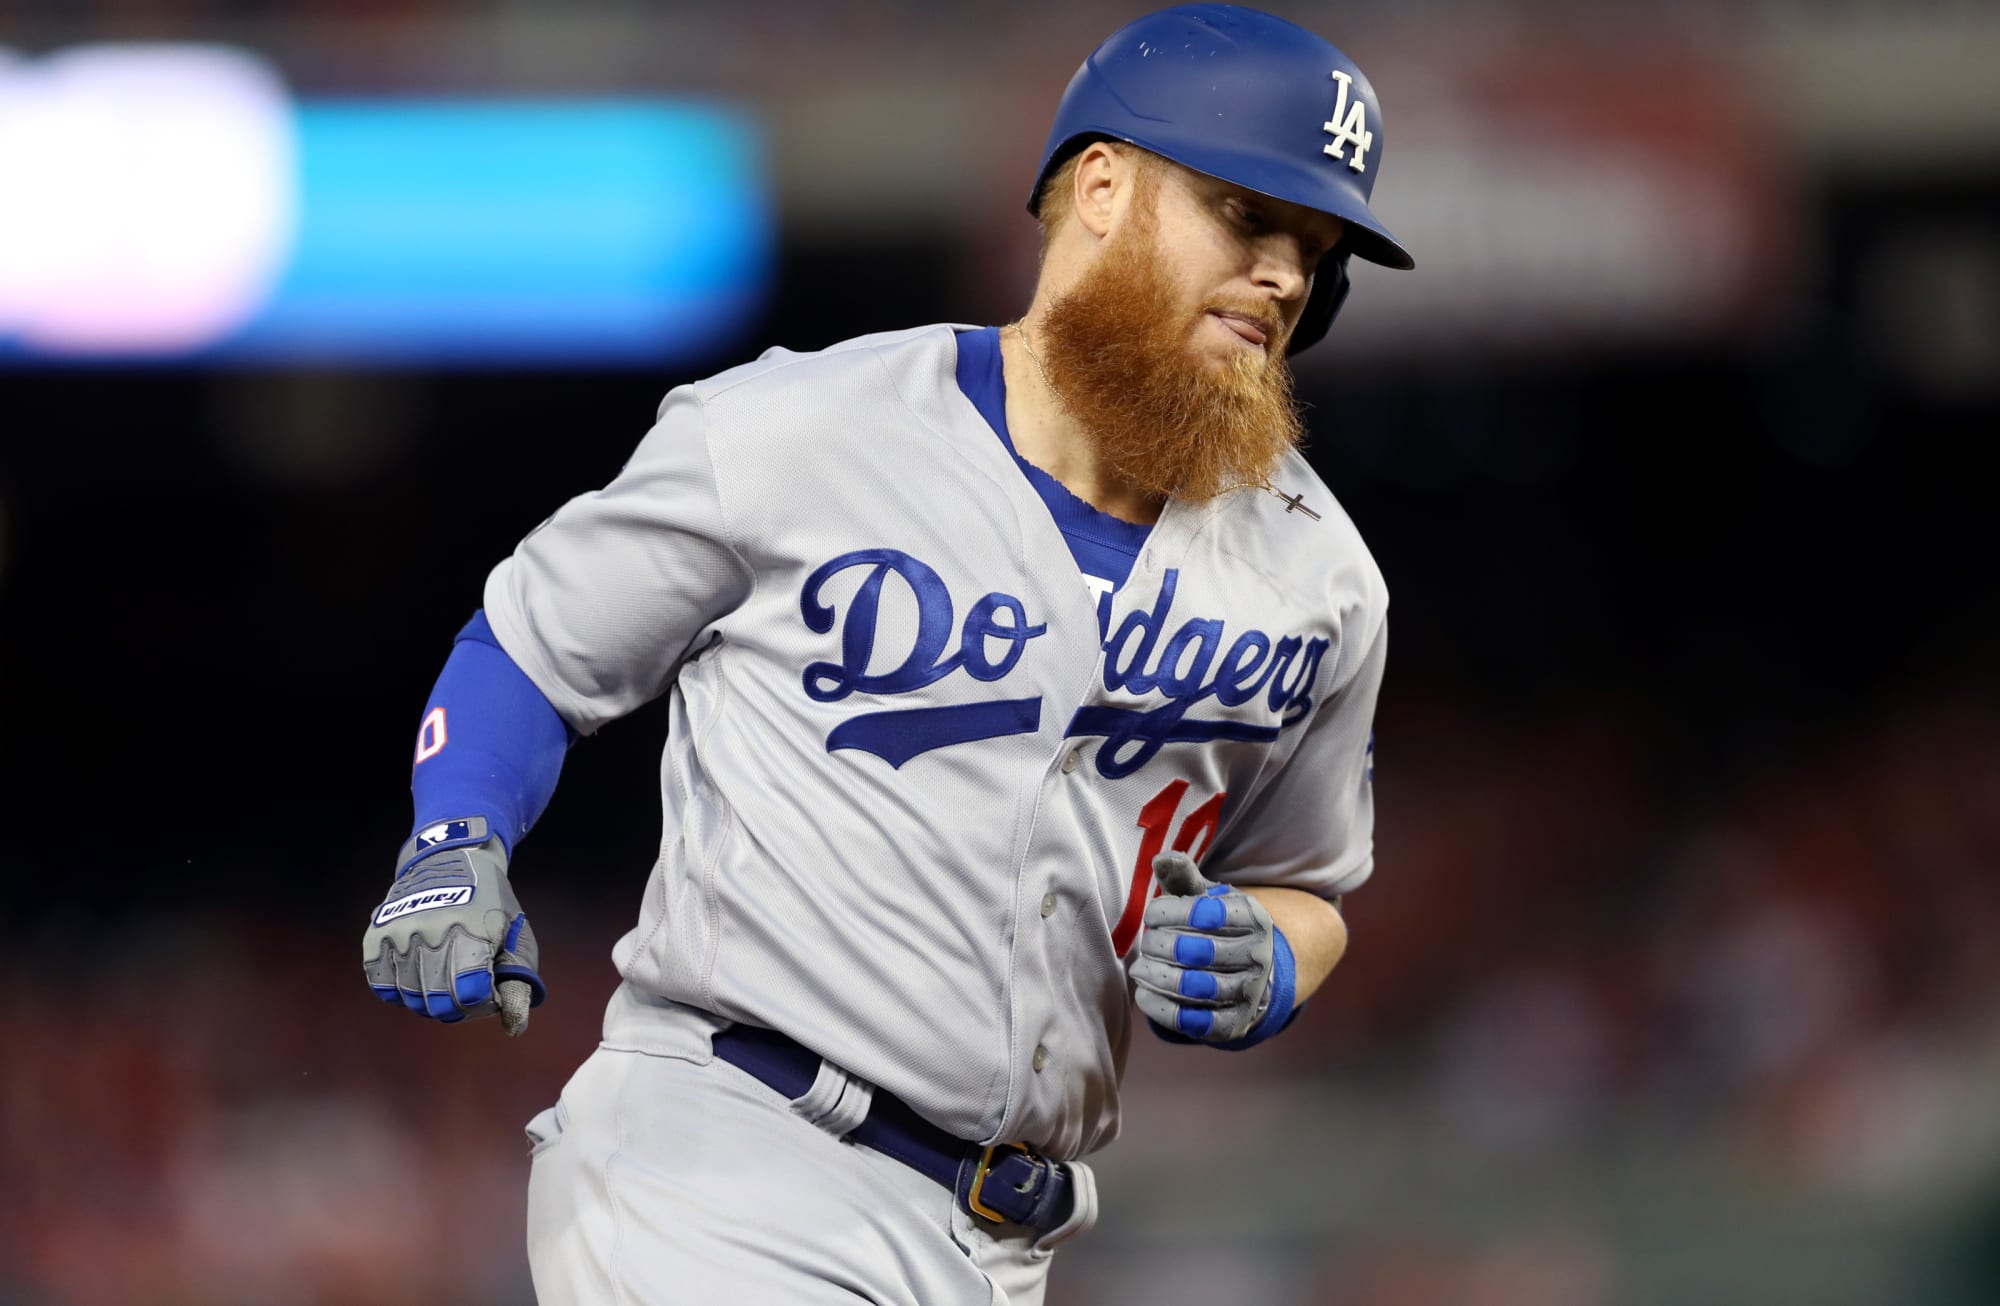 Dodgers players with the most to lose from a canceled season Page 2